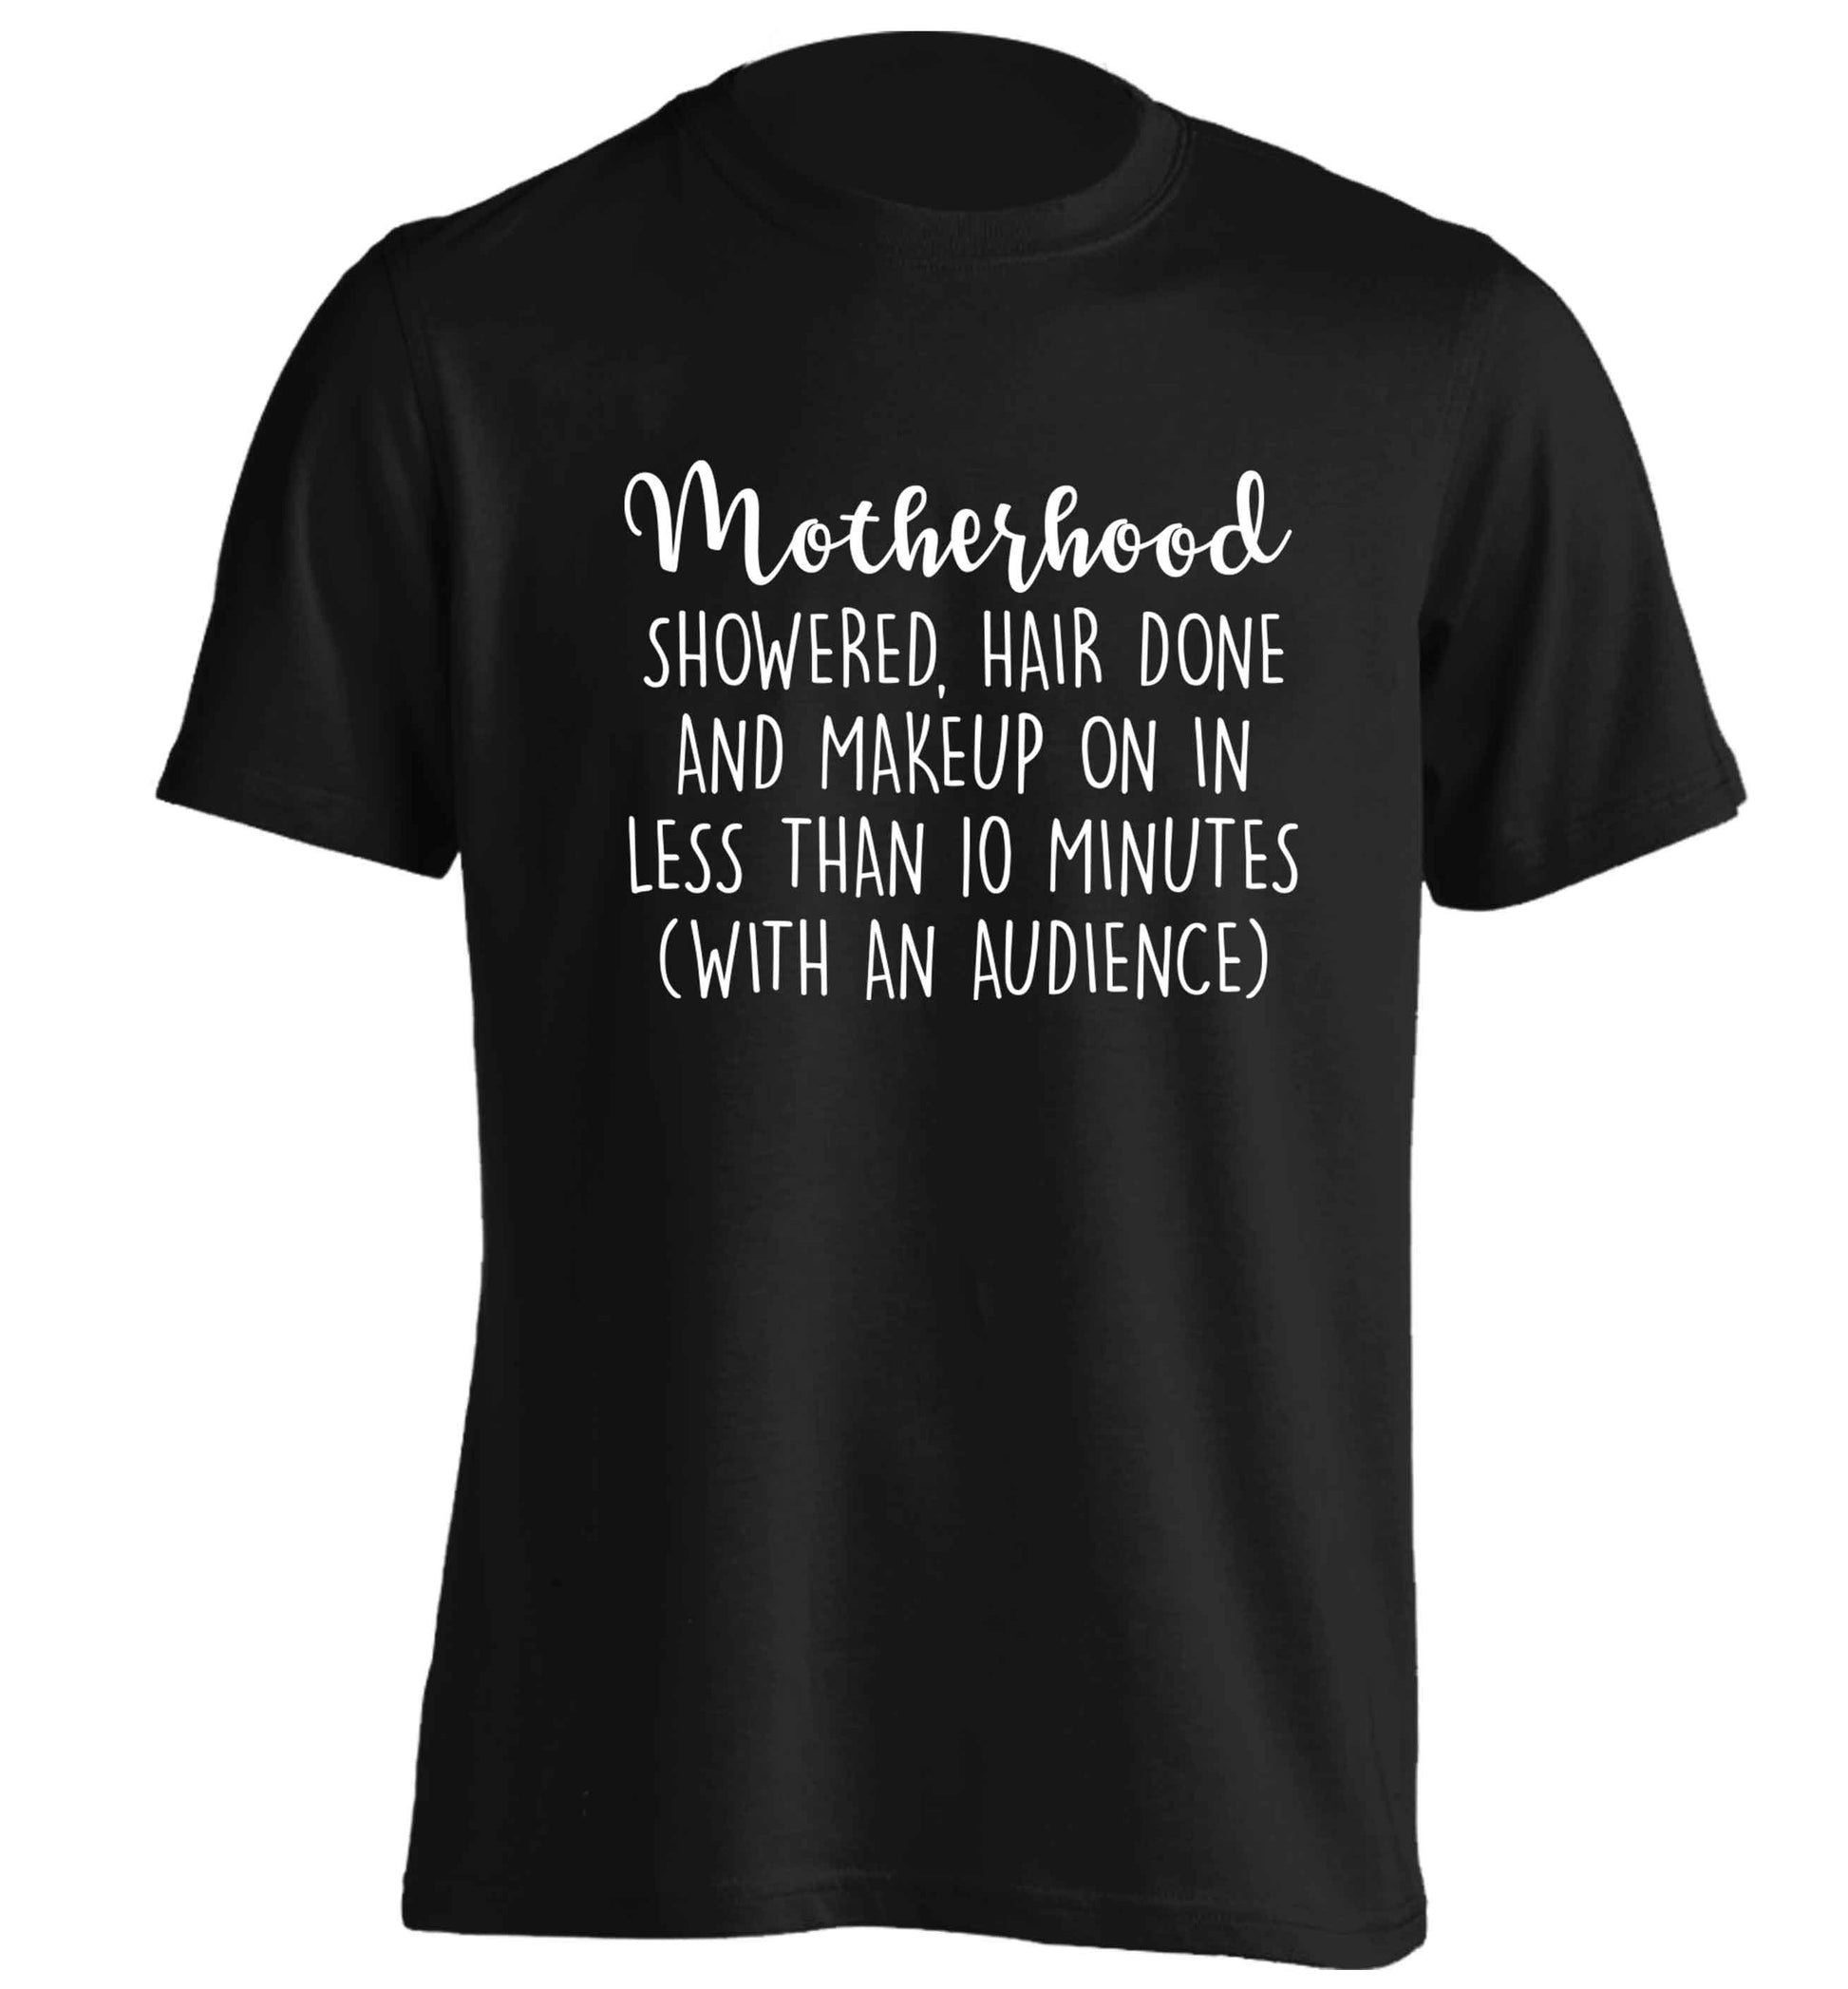 Motherhood, showered, hair done and makeup on adults unisex black Tshirt 2XL